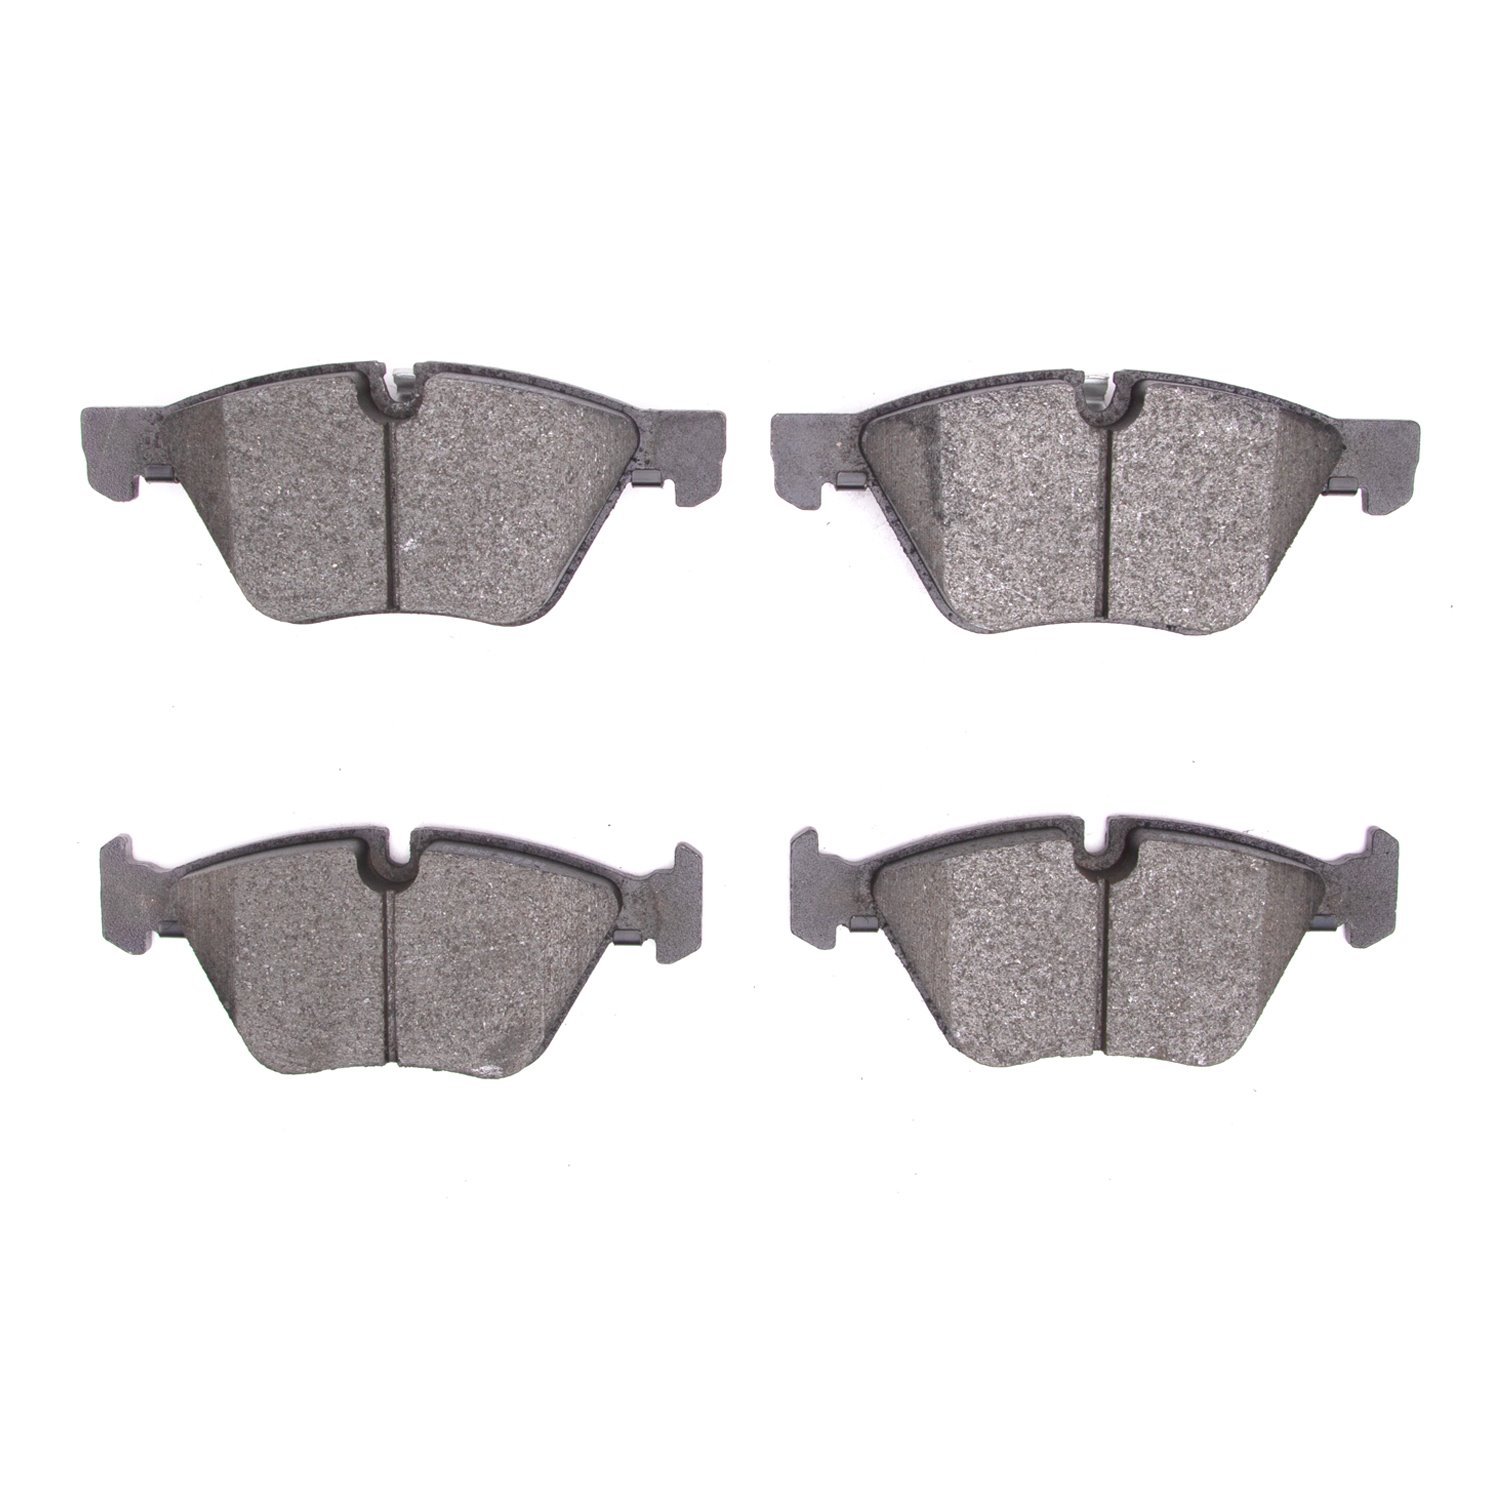 1000-1061-00 Track/Street Low-Metallic Brake Pads Kit, Fits Select BMW, Position: Front